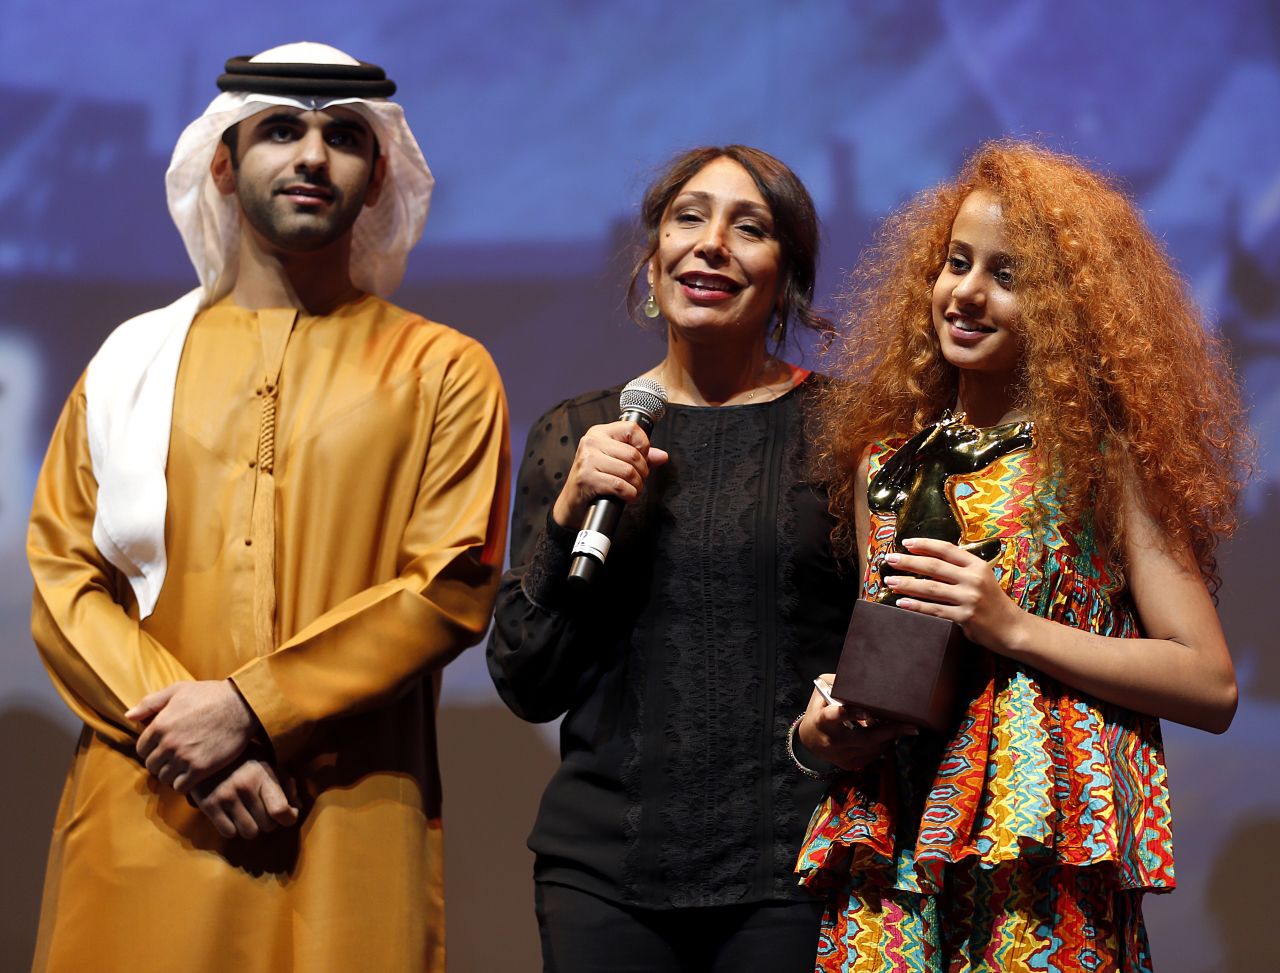 <a href="http://www.imdb.com/name/nm5152687/" target="_blank" target="_blank">Haifaa Al-Mansour</a>, center, directed Saudi Arabia's first feature film, "<a href="http://www.imdb.com/title/tt2258858/" target="_blank" target="_blank">WADJDA</a>", which won best film at the <a href="http://www.dubaifilmfest.com/en/" target="_blank" target="_blank">Dubai International Film Festival </a>in 2011. 